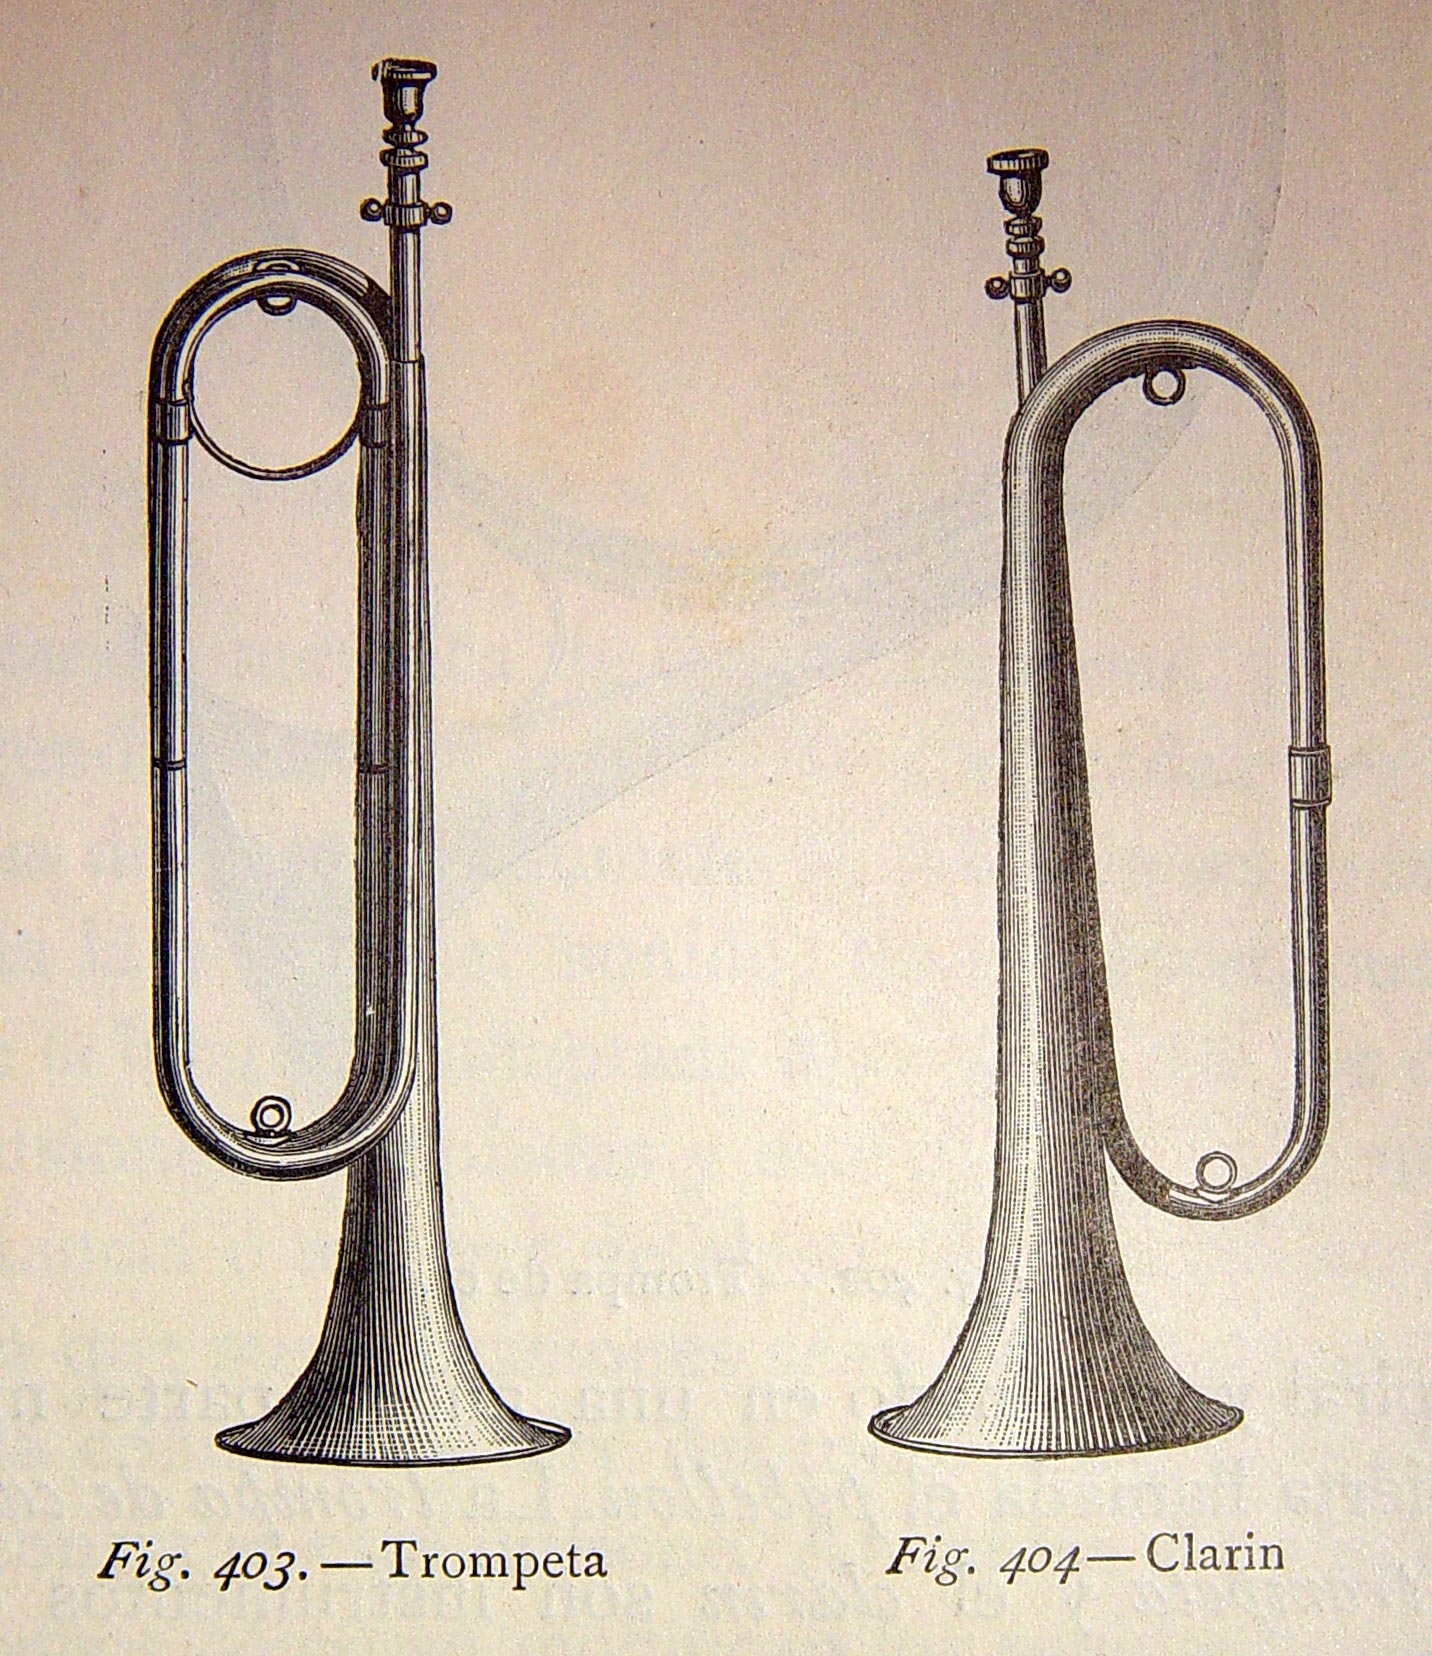 an old music instrument and a trumpet are engraved in this illustration